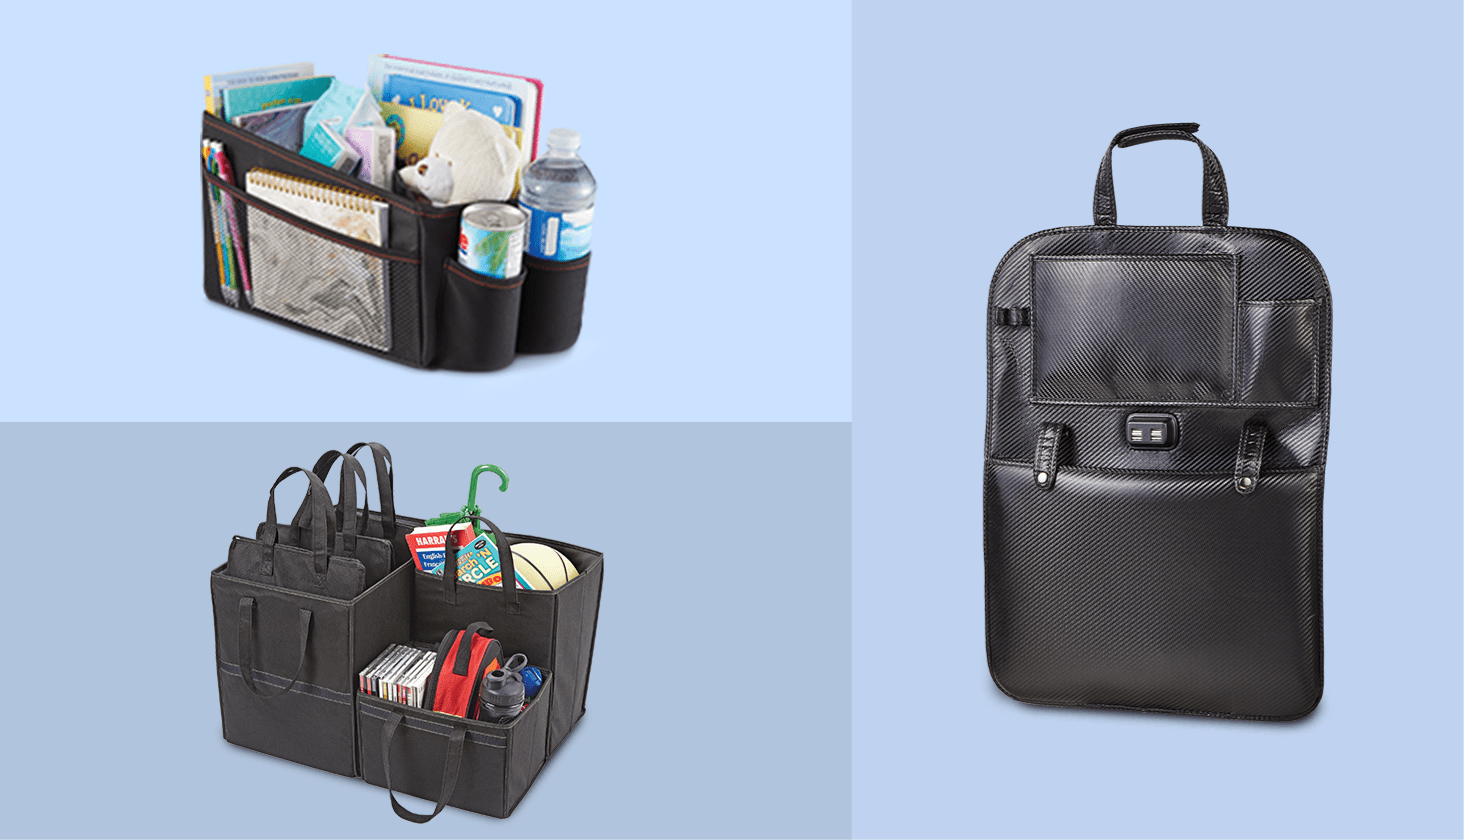 A black AutoTrends Multi-Purpose Car Organizer filled with children’s books, a stuffed toy, and drink containers set against a blue background.